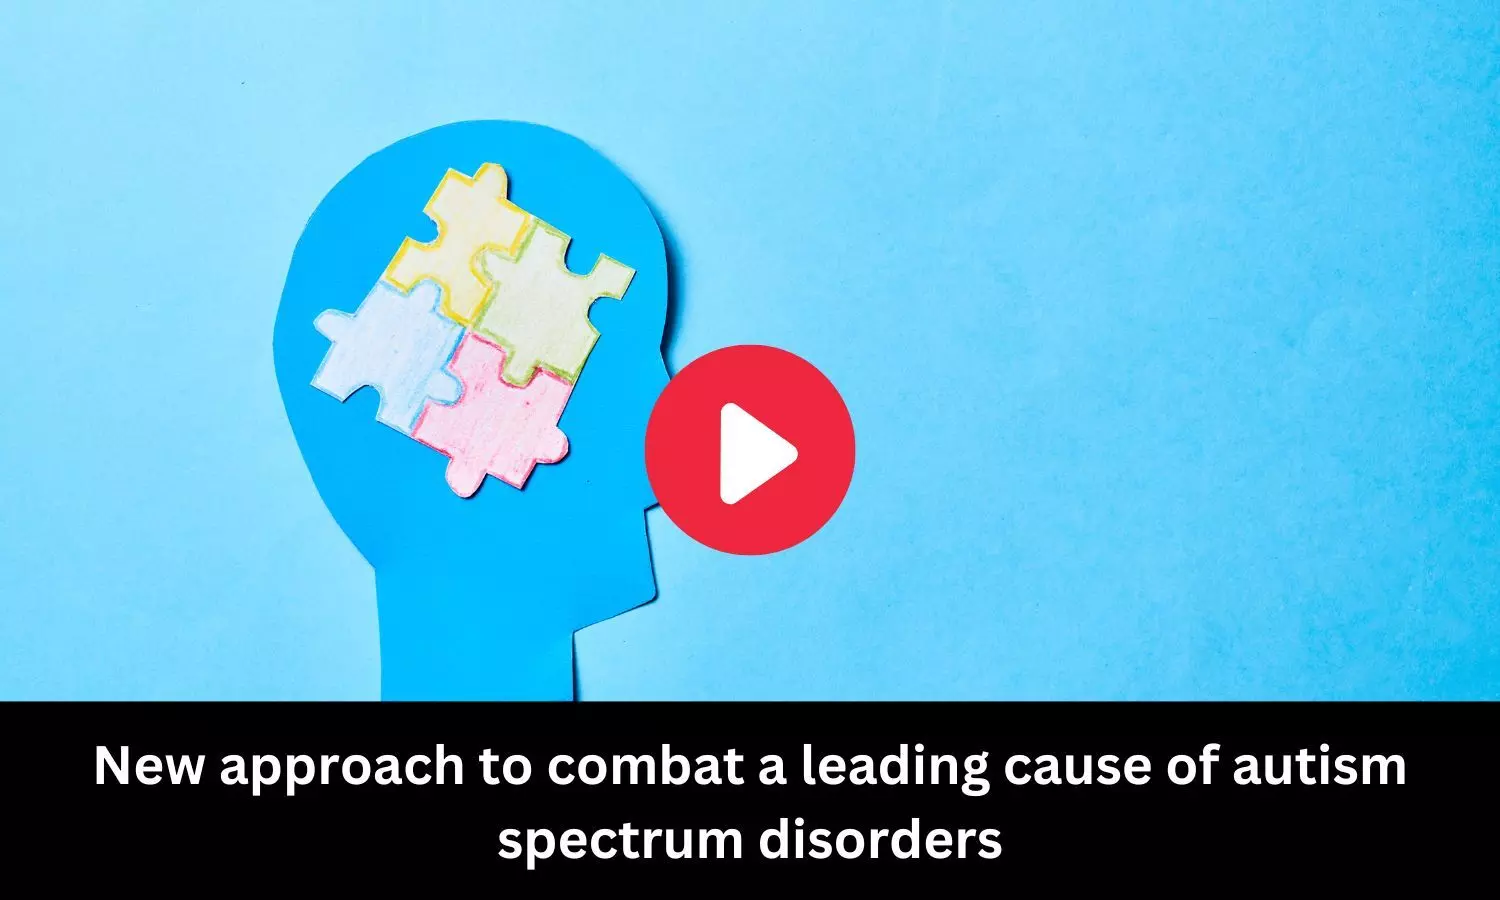 New approach to combat a leading cause of autism spectrum disorders